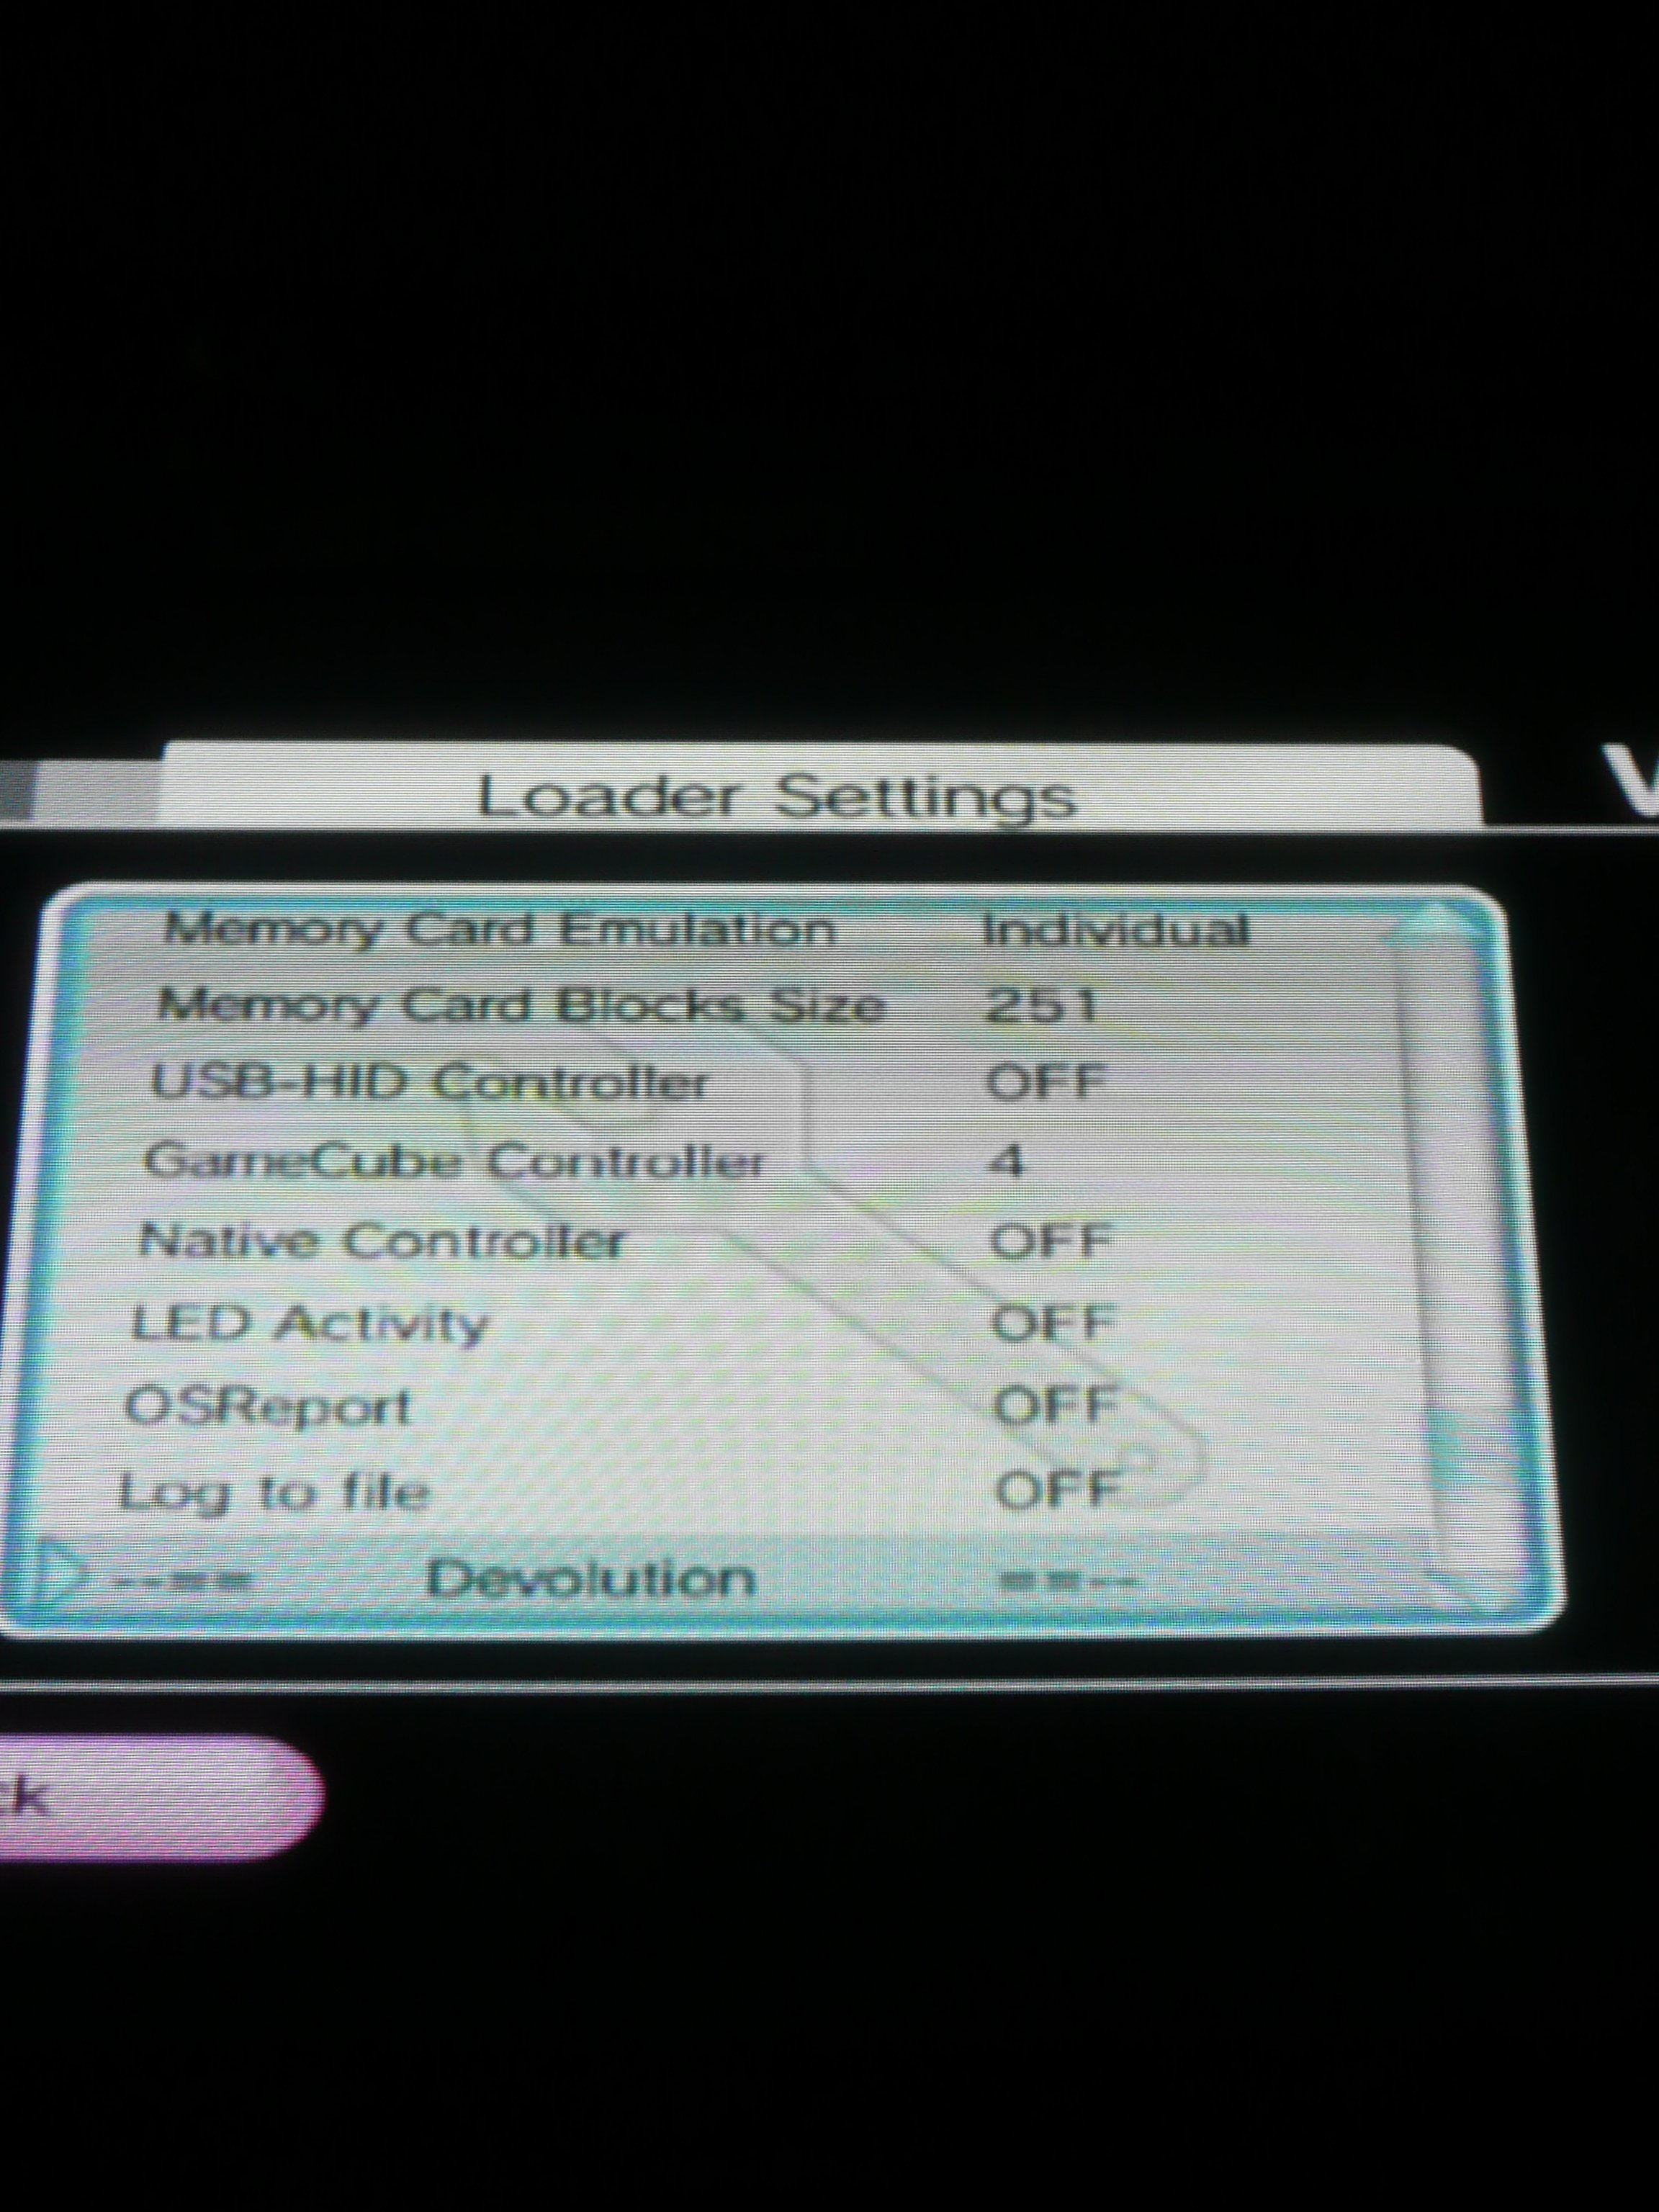 Troubleshooting Usb Loader Gx Possible External Hdd Recommendation Gbatemp Net The Independent Video Game Community